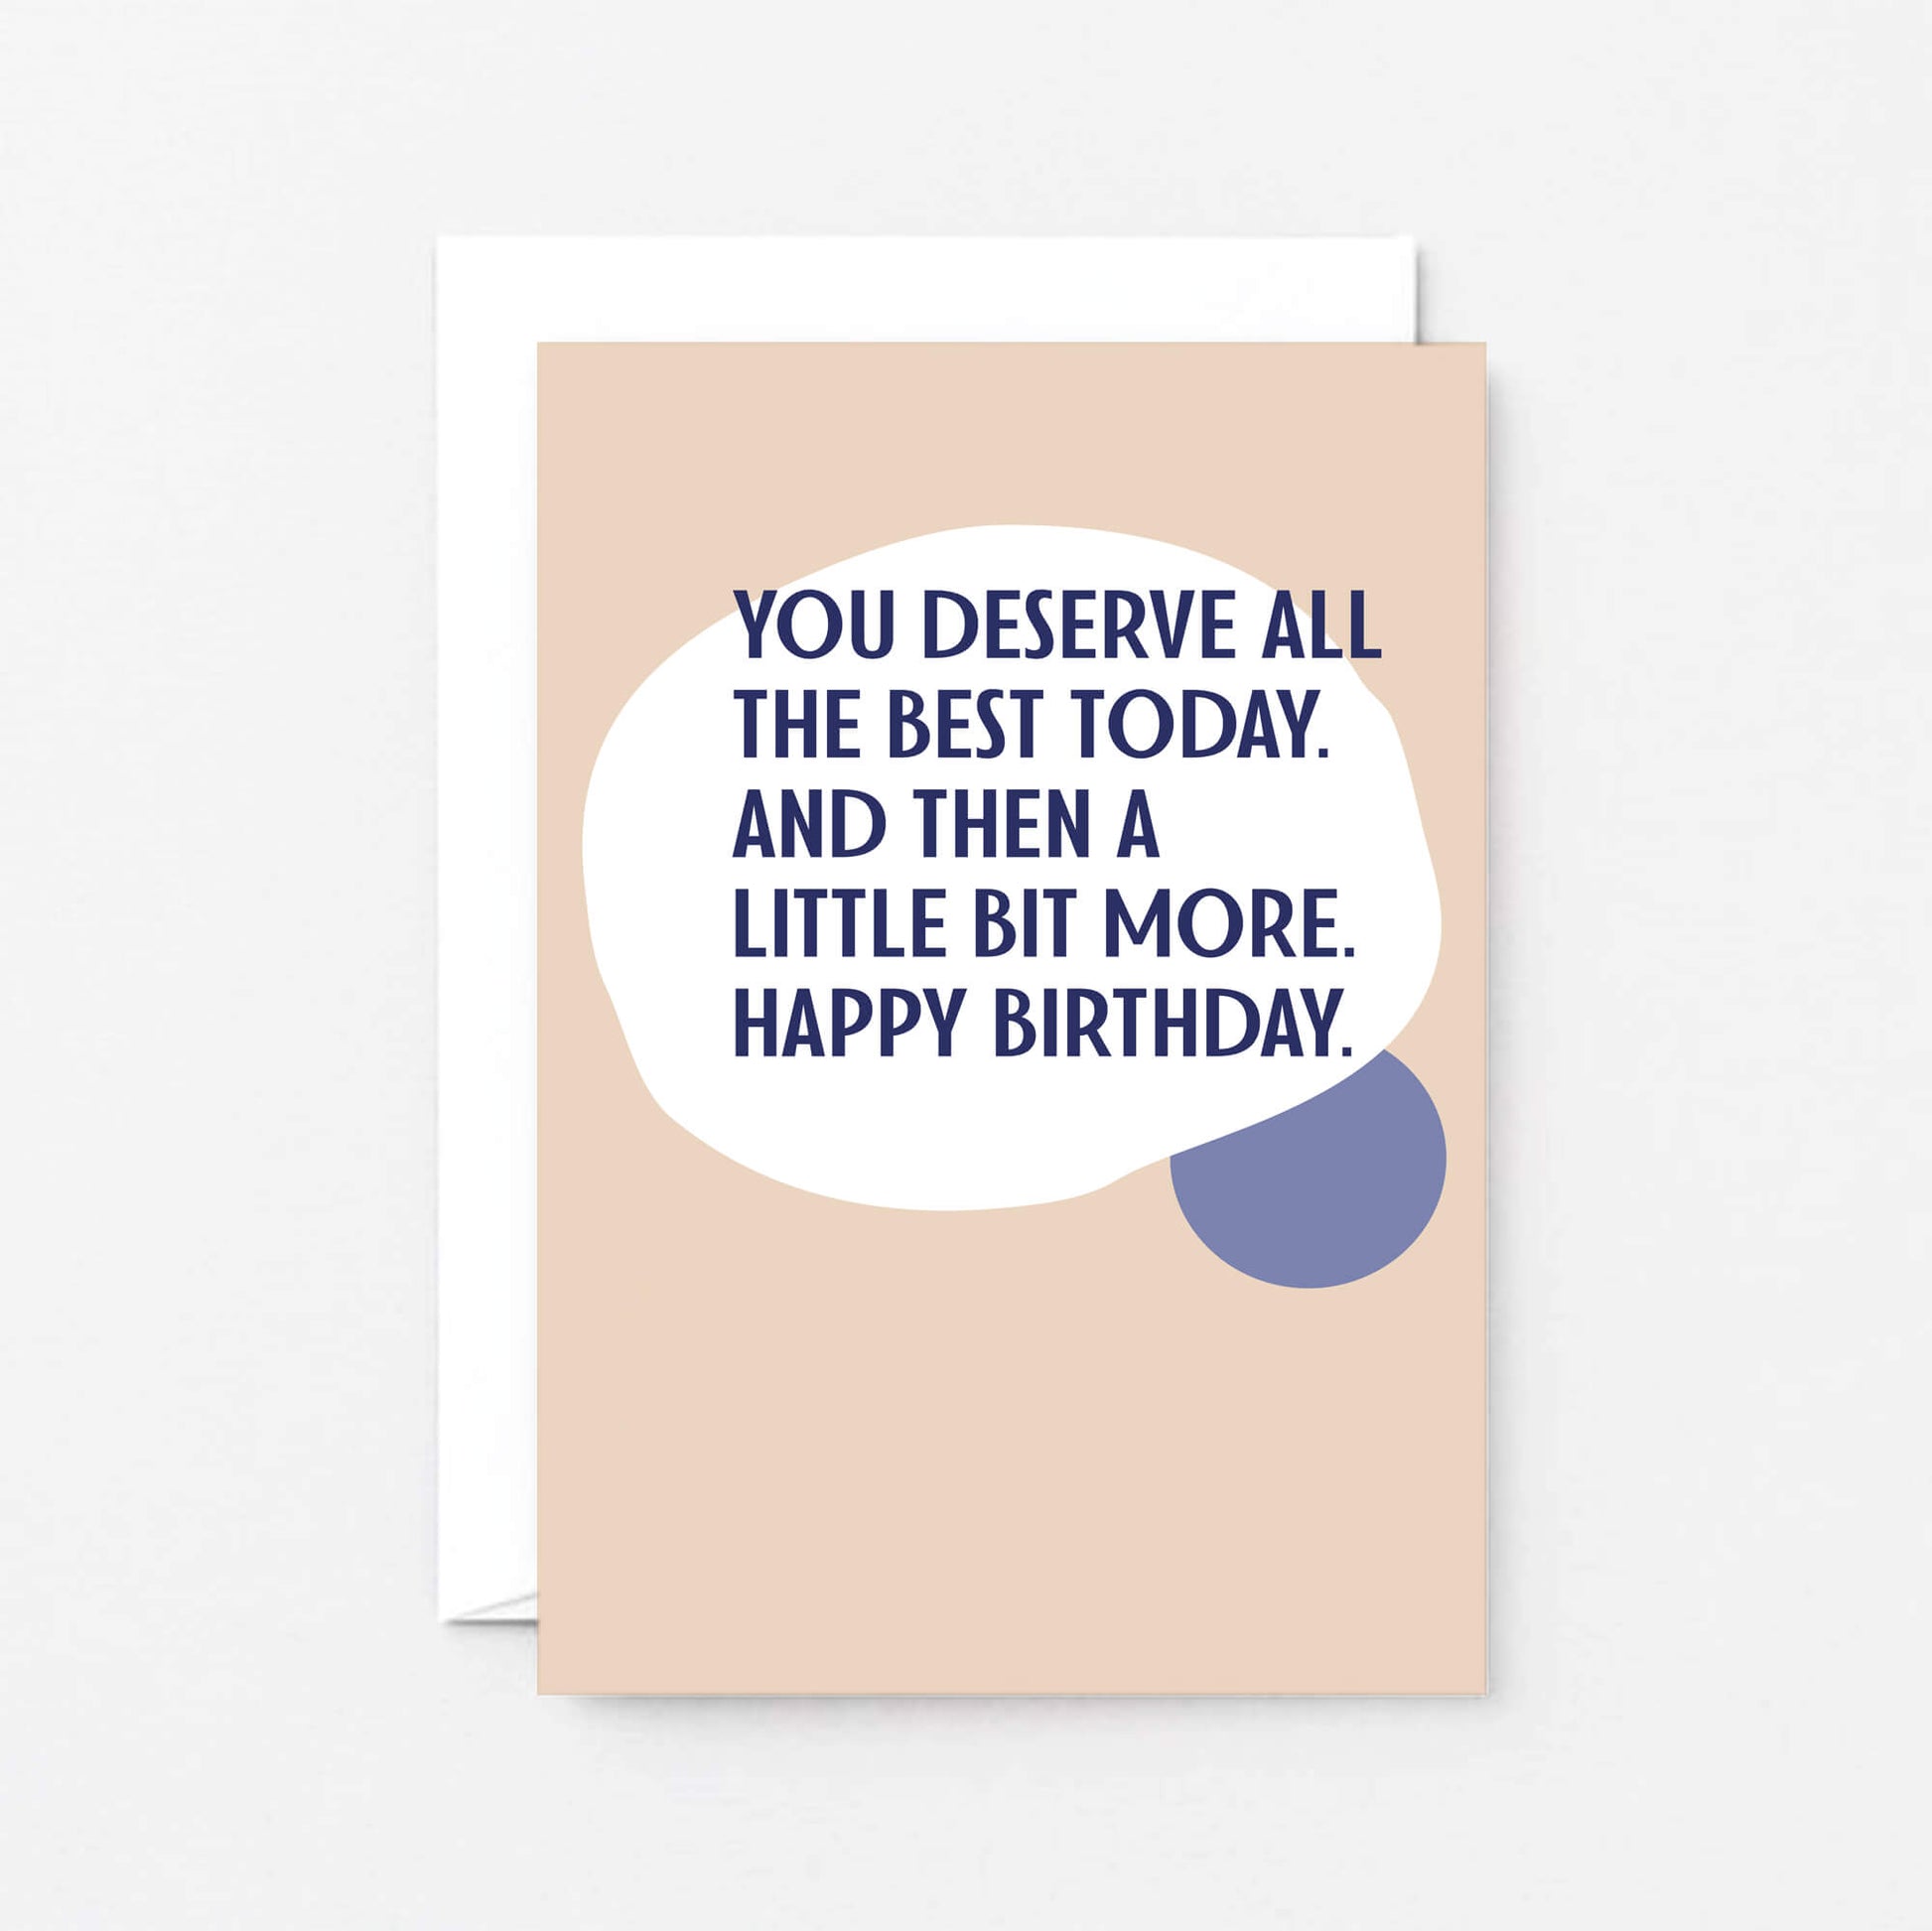 Birthday Card by SixElevenCreations. Reads You deserve all the best today. And then a little bit more. Happy birthday. Product Code SE1101A6